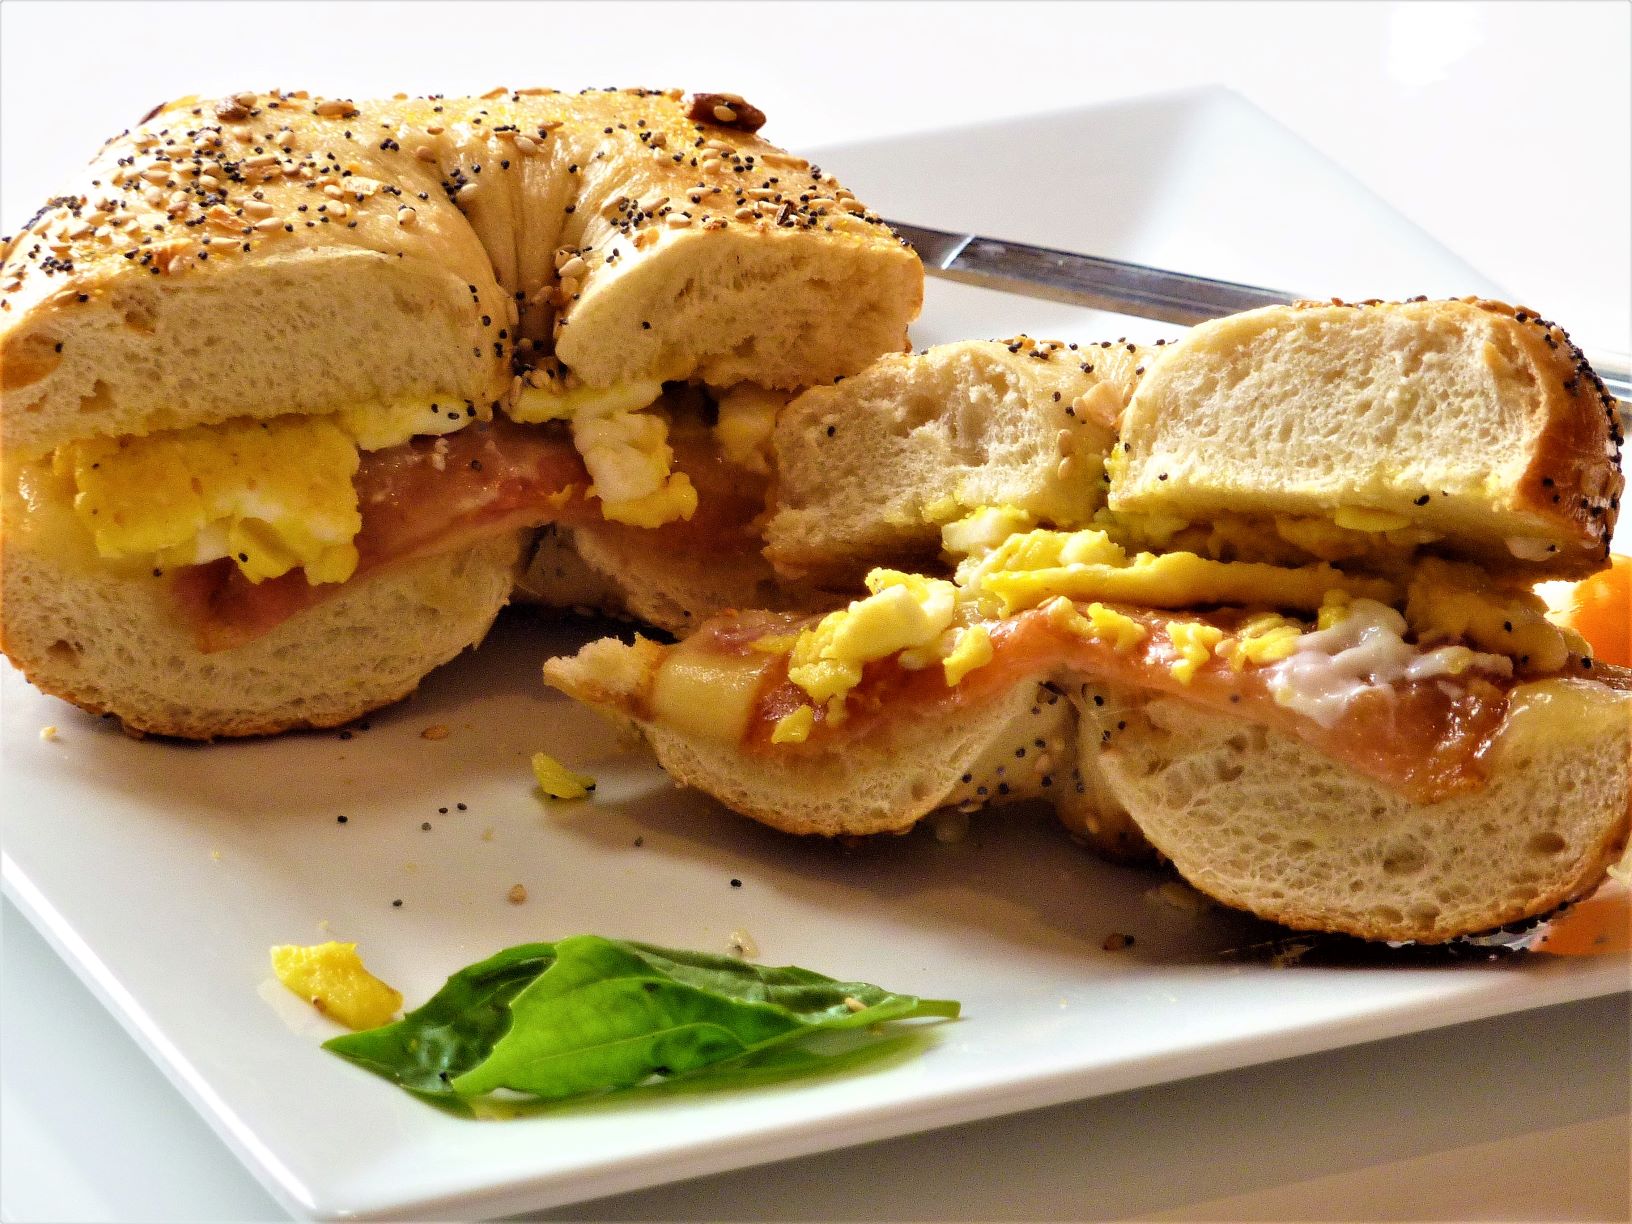 Bacon, egg and cheese on a bagel from Millis Clicquot Coffee.